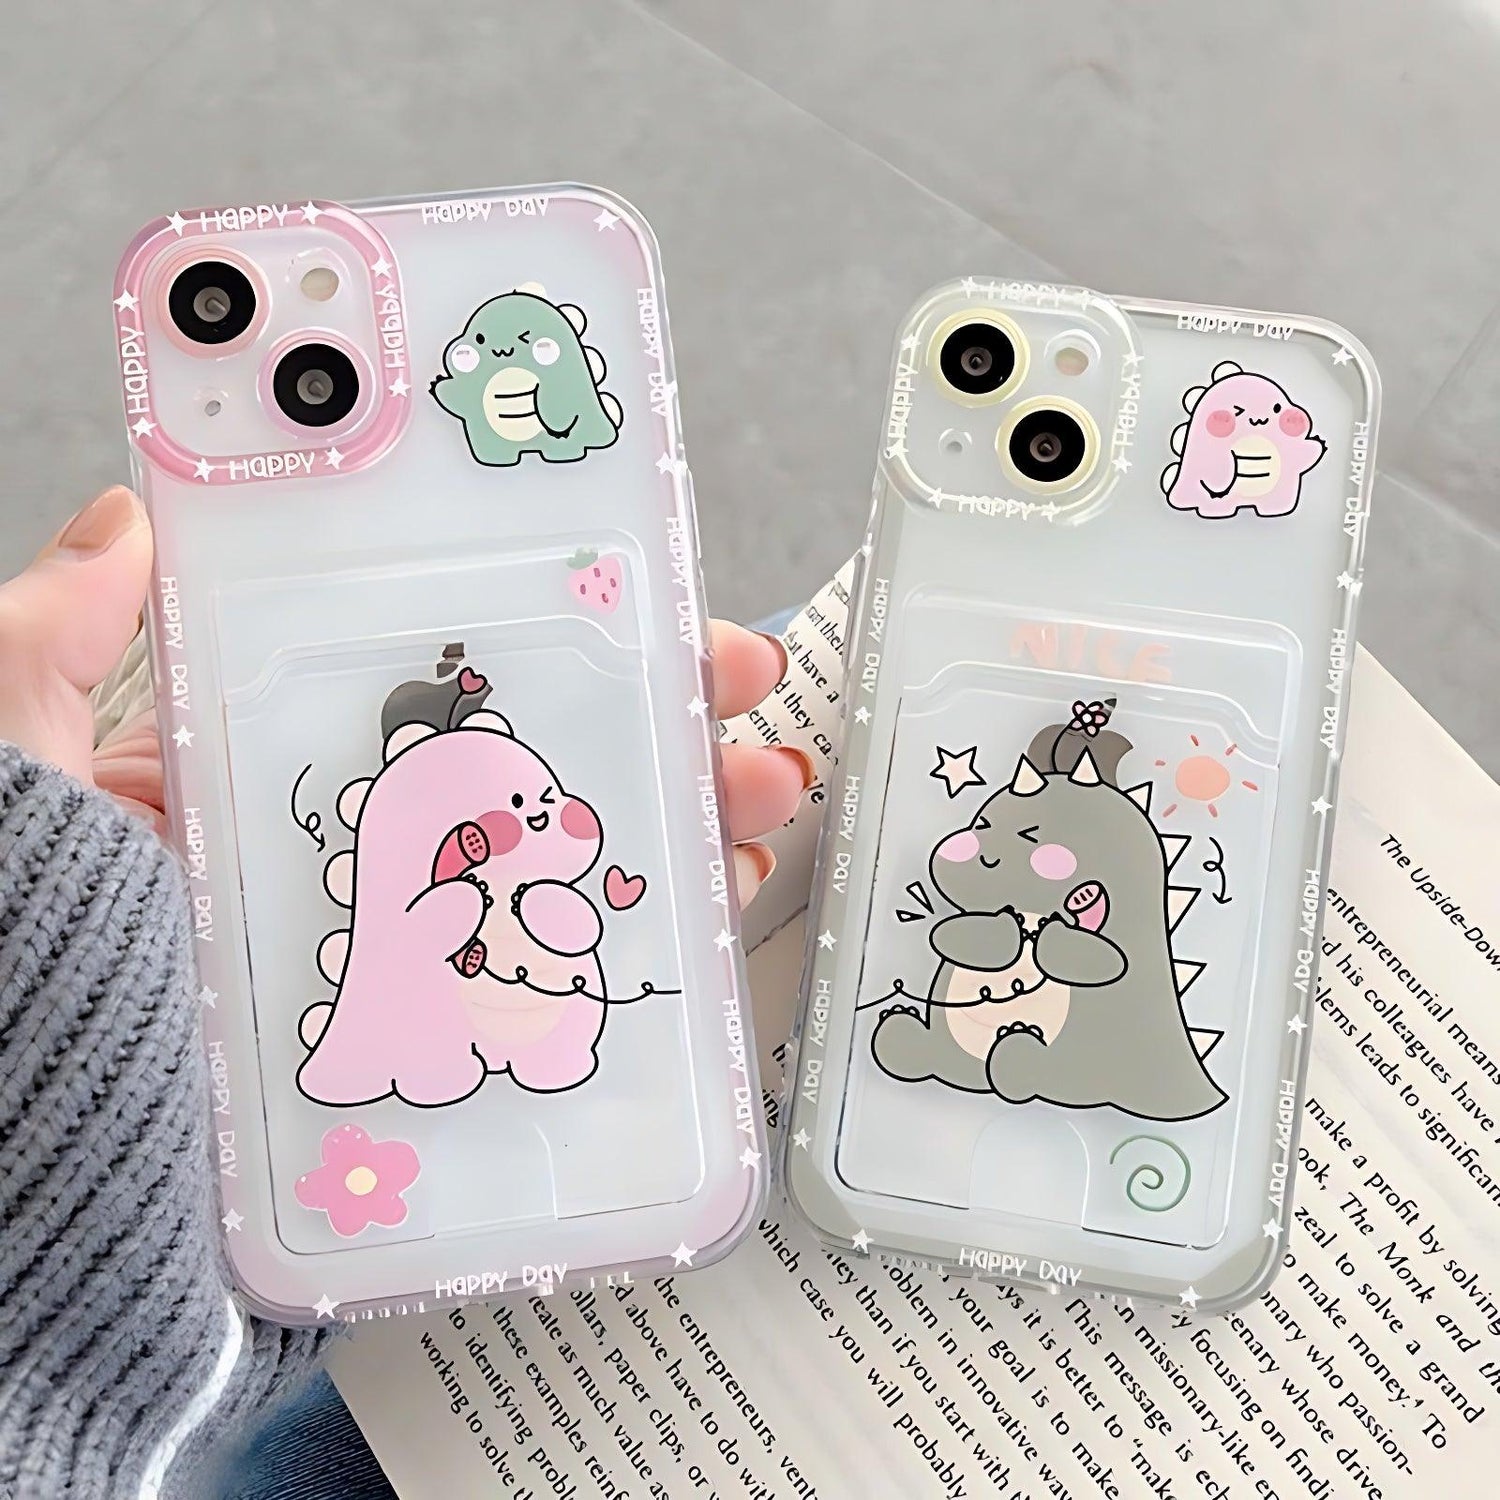 Couples Phone Cases - Touchy Style .